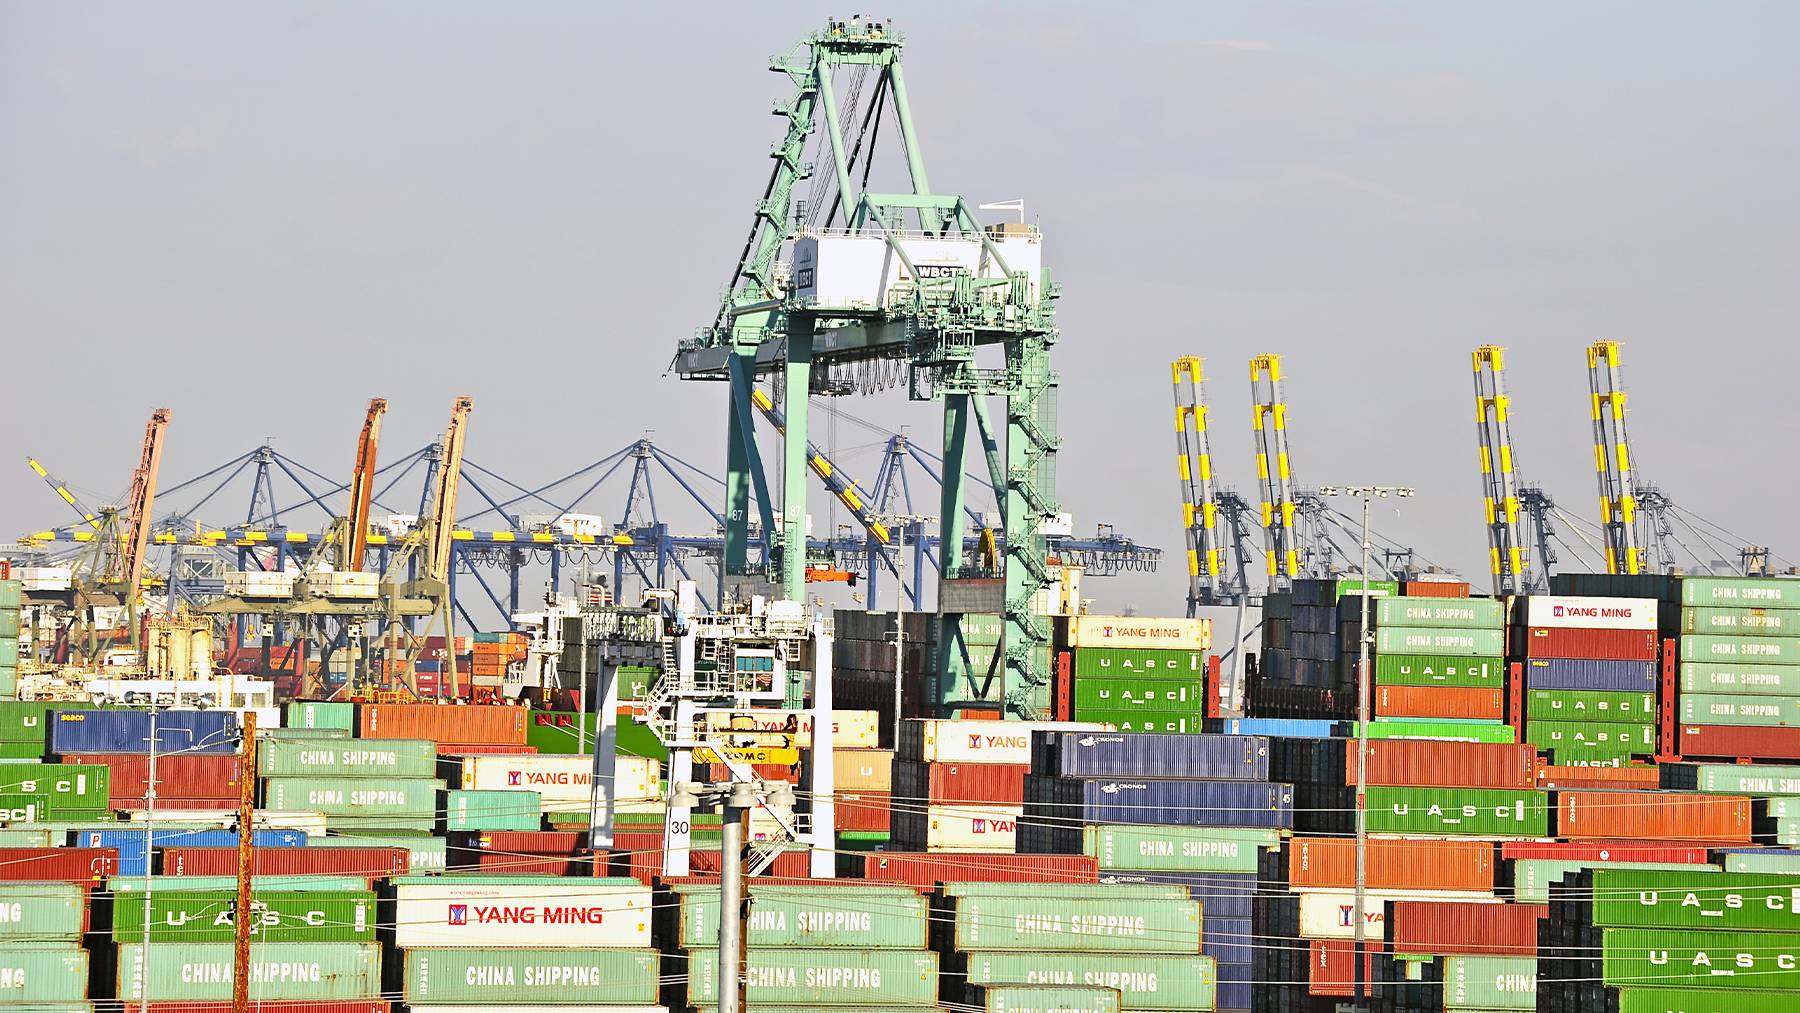 Port containers in green, blue and red.